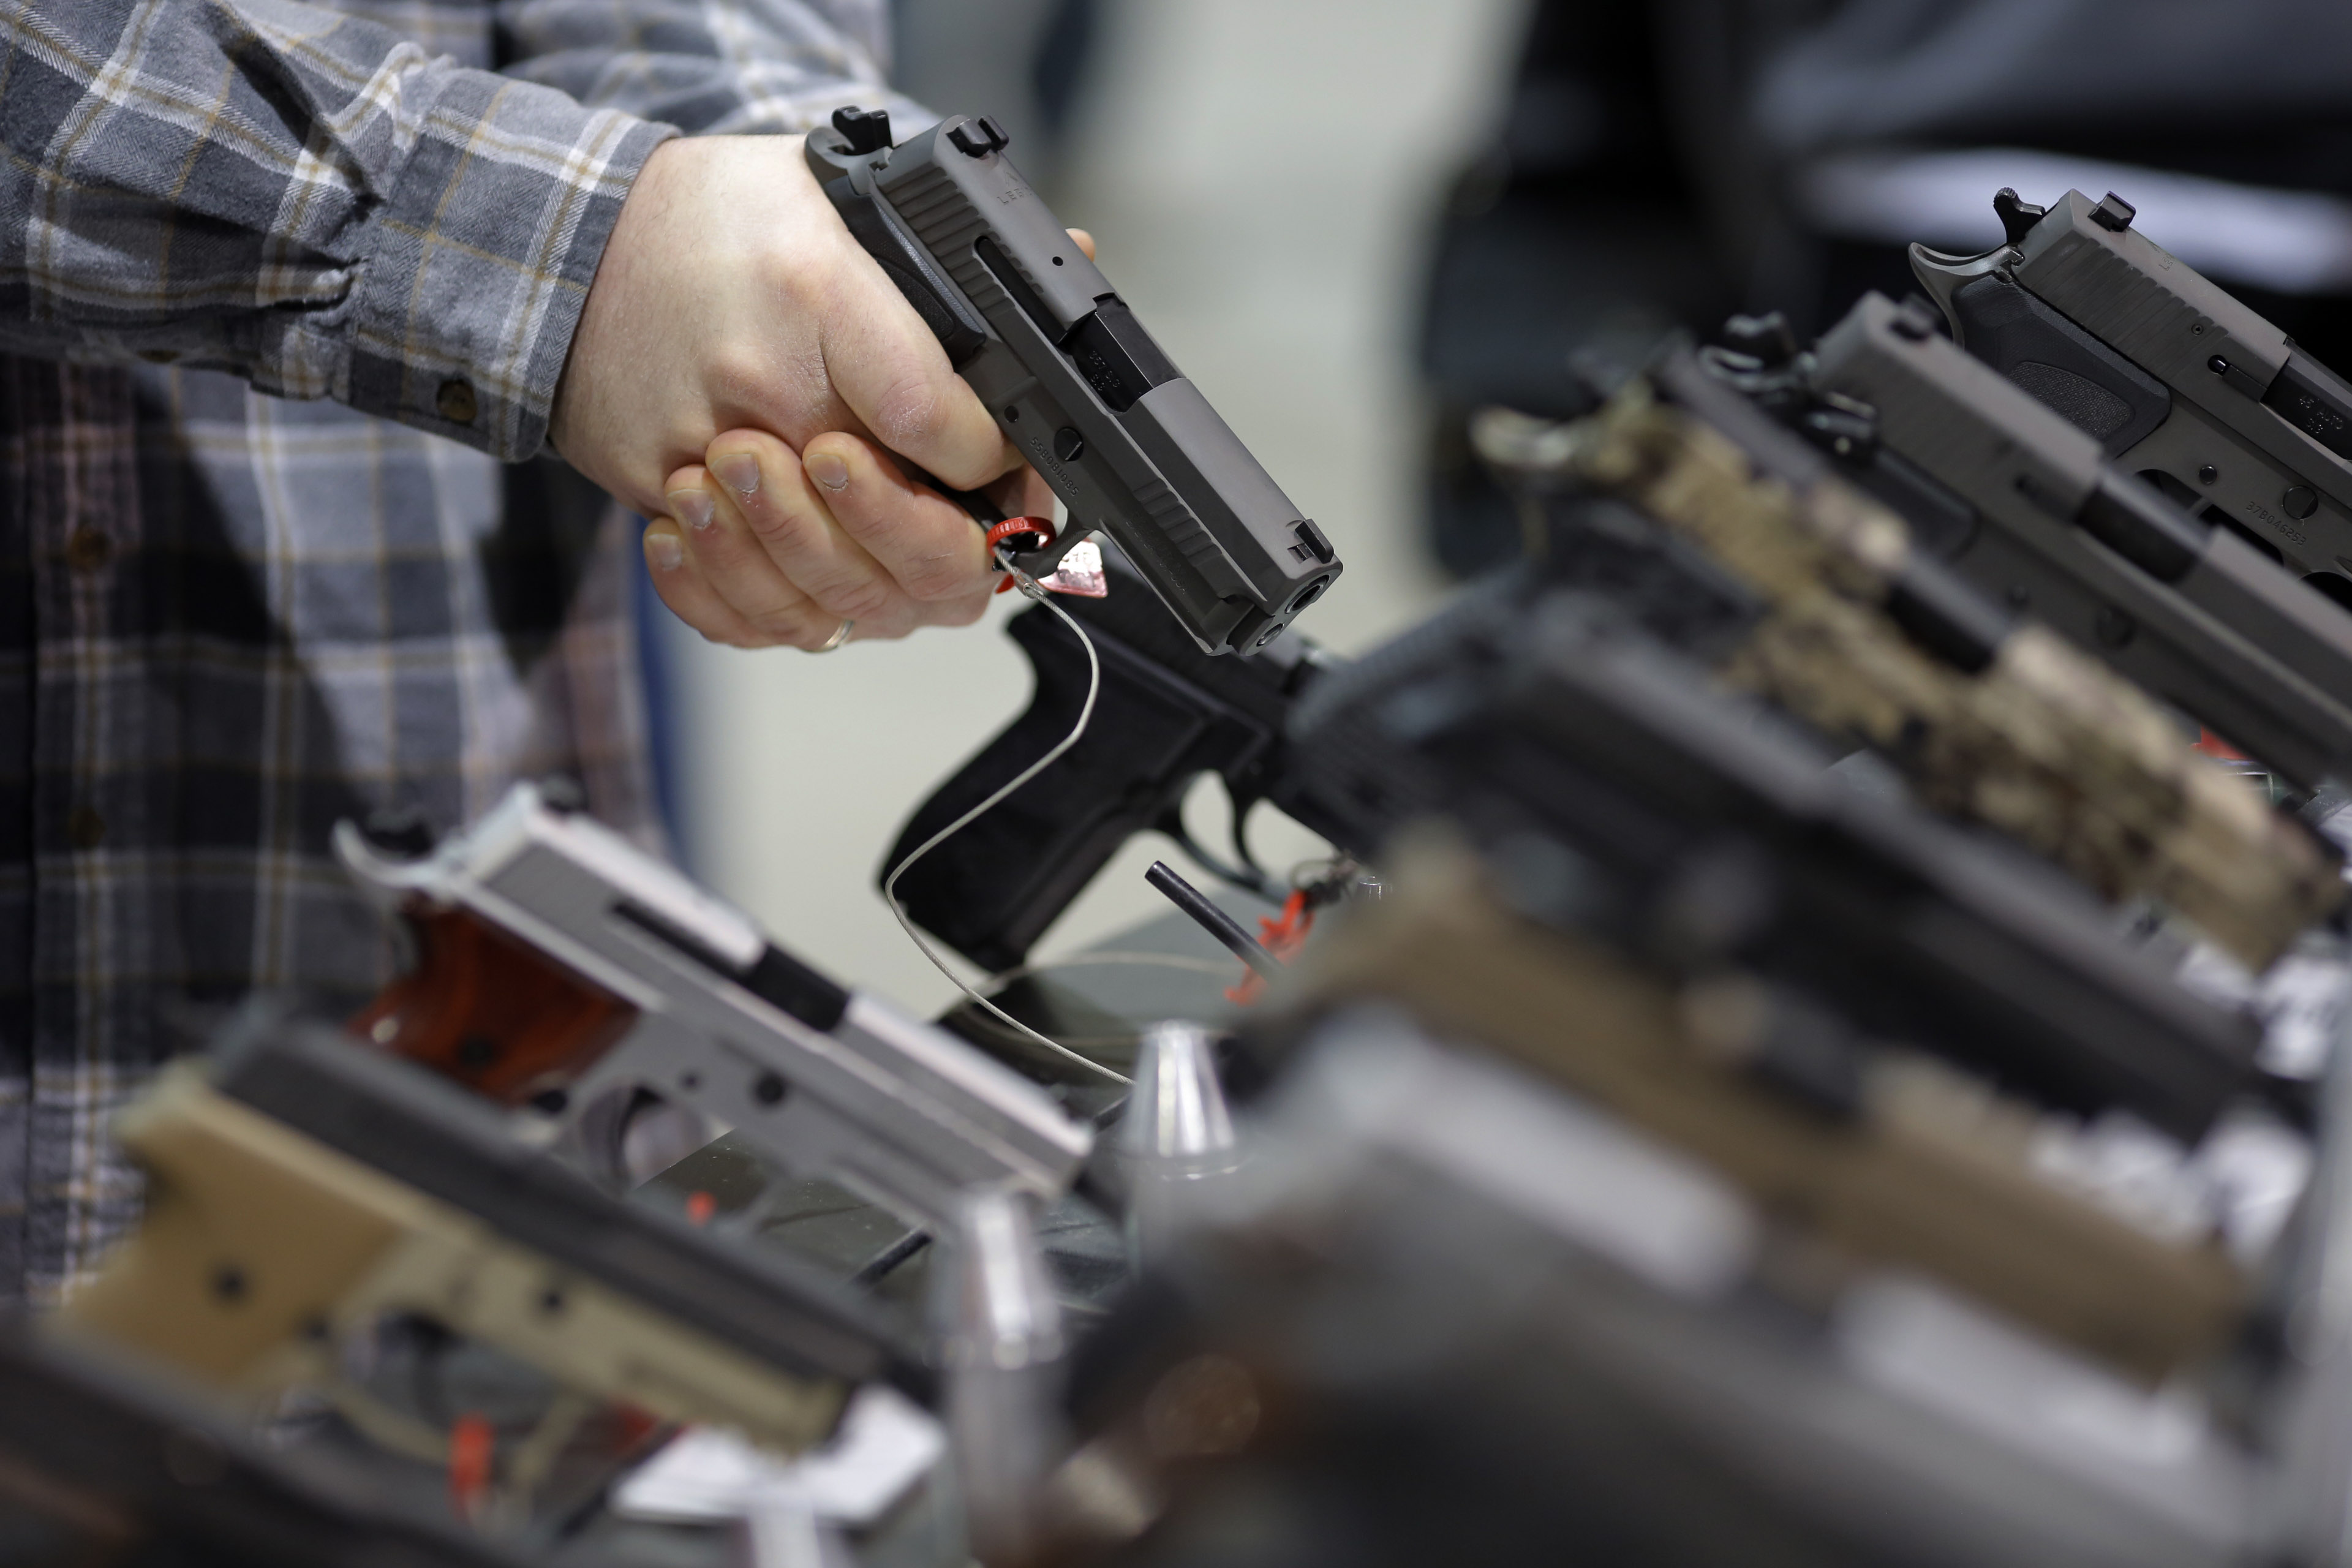 A visitor holds a pistol at a gun display during a National Rifle Association outdoor sports trade show on February 10, 2017 in Harrisburg, Pennsylvania. (Dominick Reuter—AFP/Getty Images)